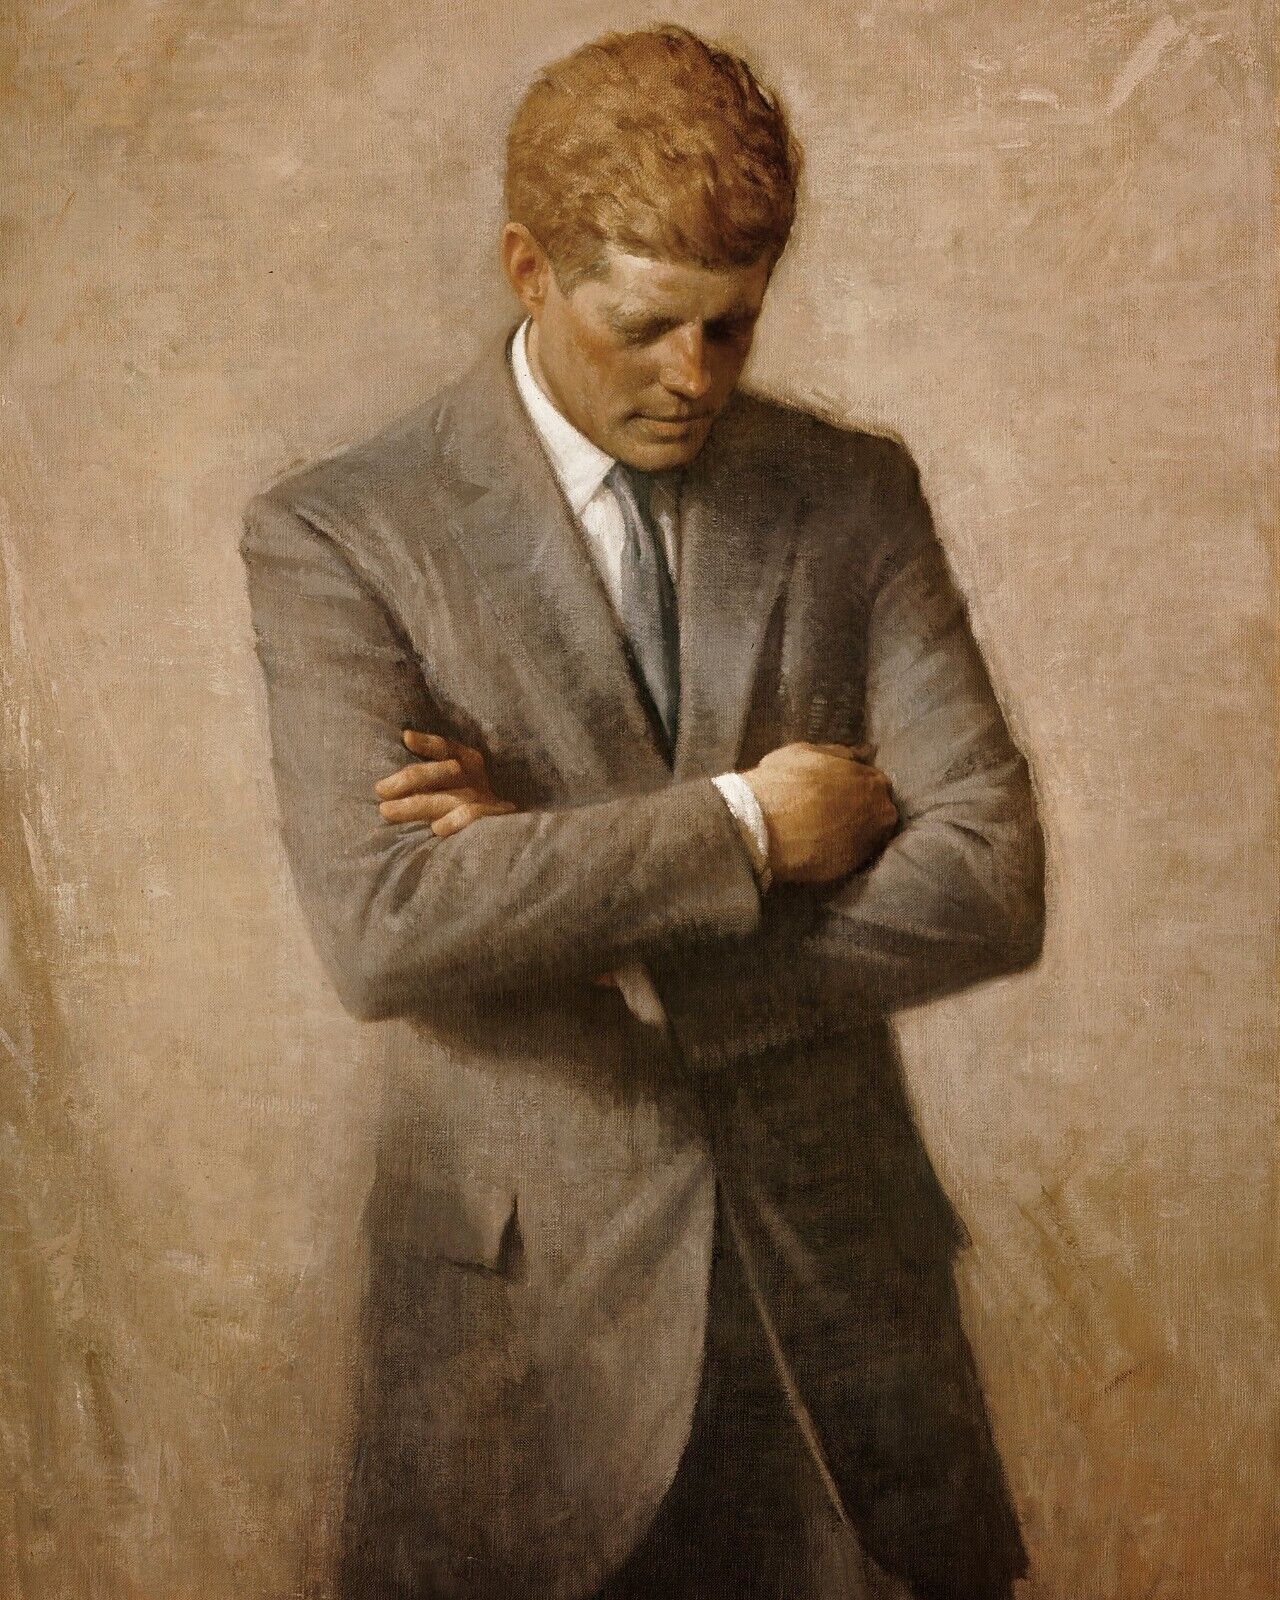 PRESIDENT JOHN F. KENNEDY OF OFFICIAL PAINTING 8X10 PHOTOGRAPH REPRINT